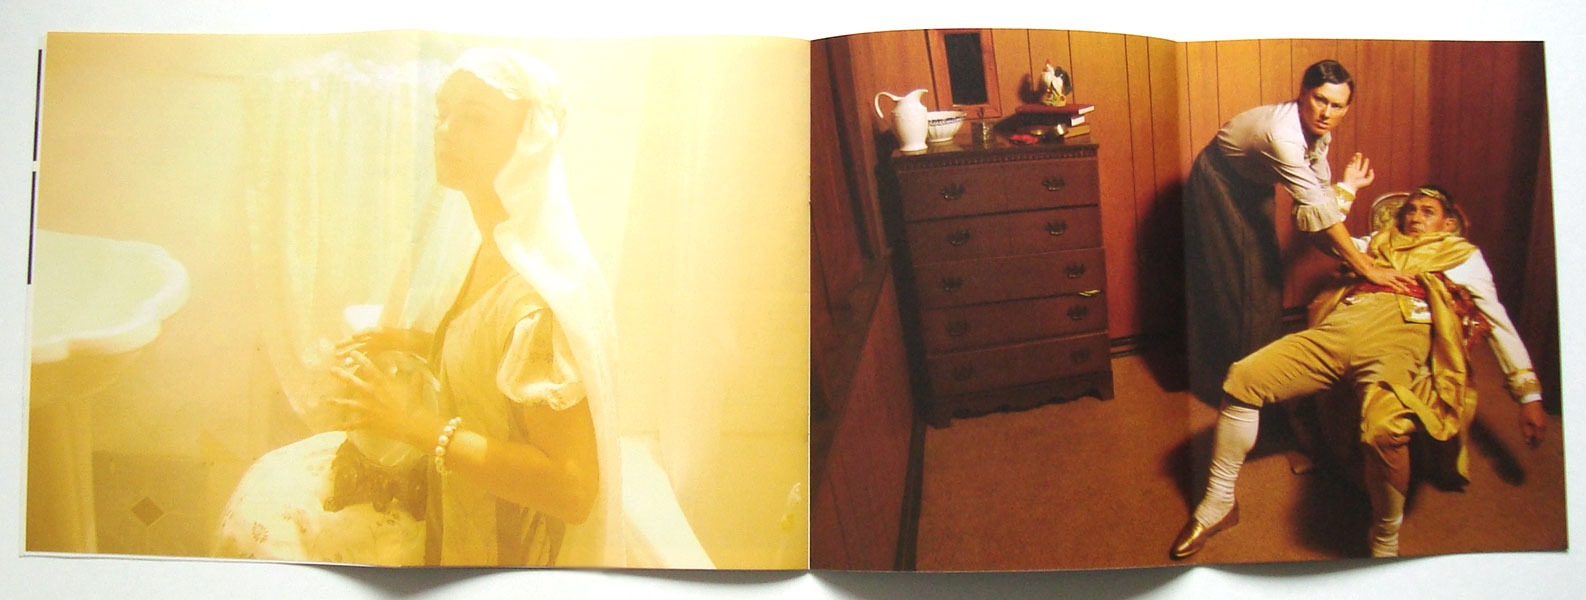 Gallery guide, Catherine Sullivan: Triangle of Need, Walker Art Center, 2007 (collaboration with Layla Tweedie-Cullen)